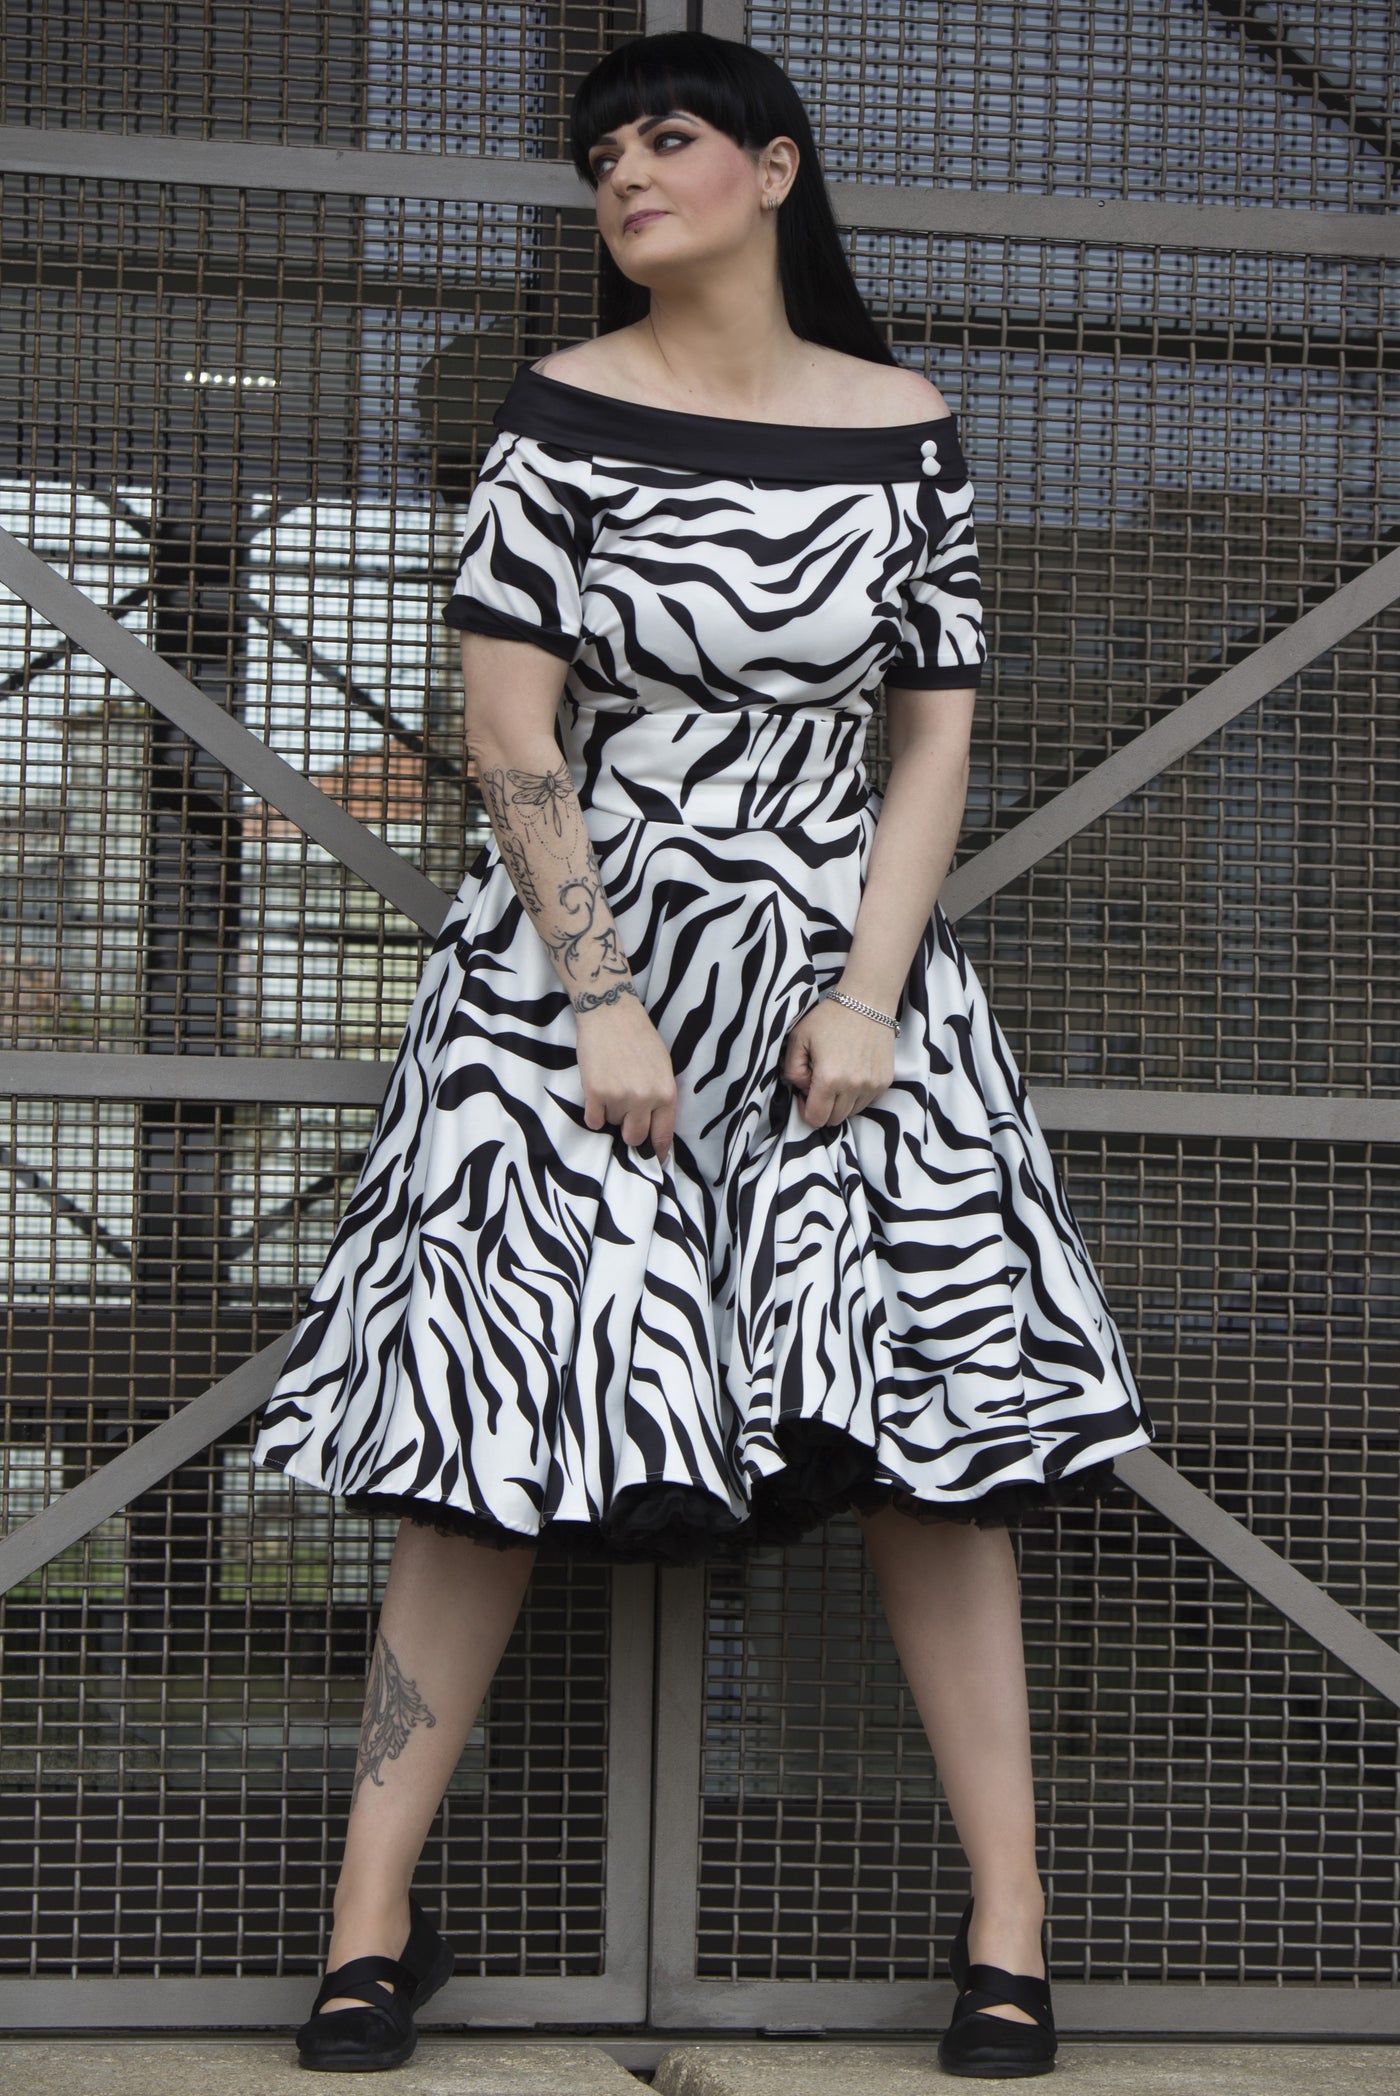 Woman wears our short sleeve flared dress, in white and black zebra print, with a black petticoat, against a metal gate